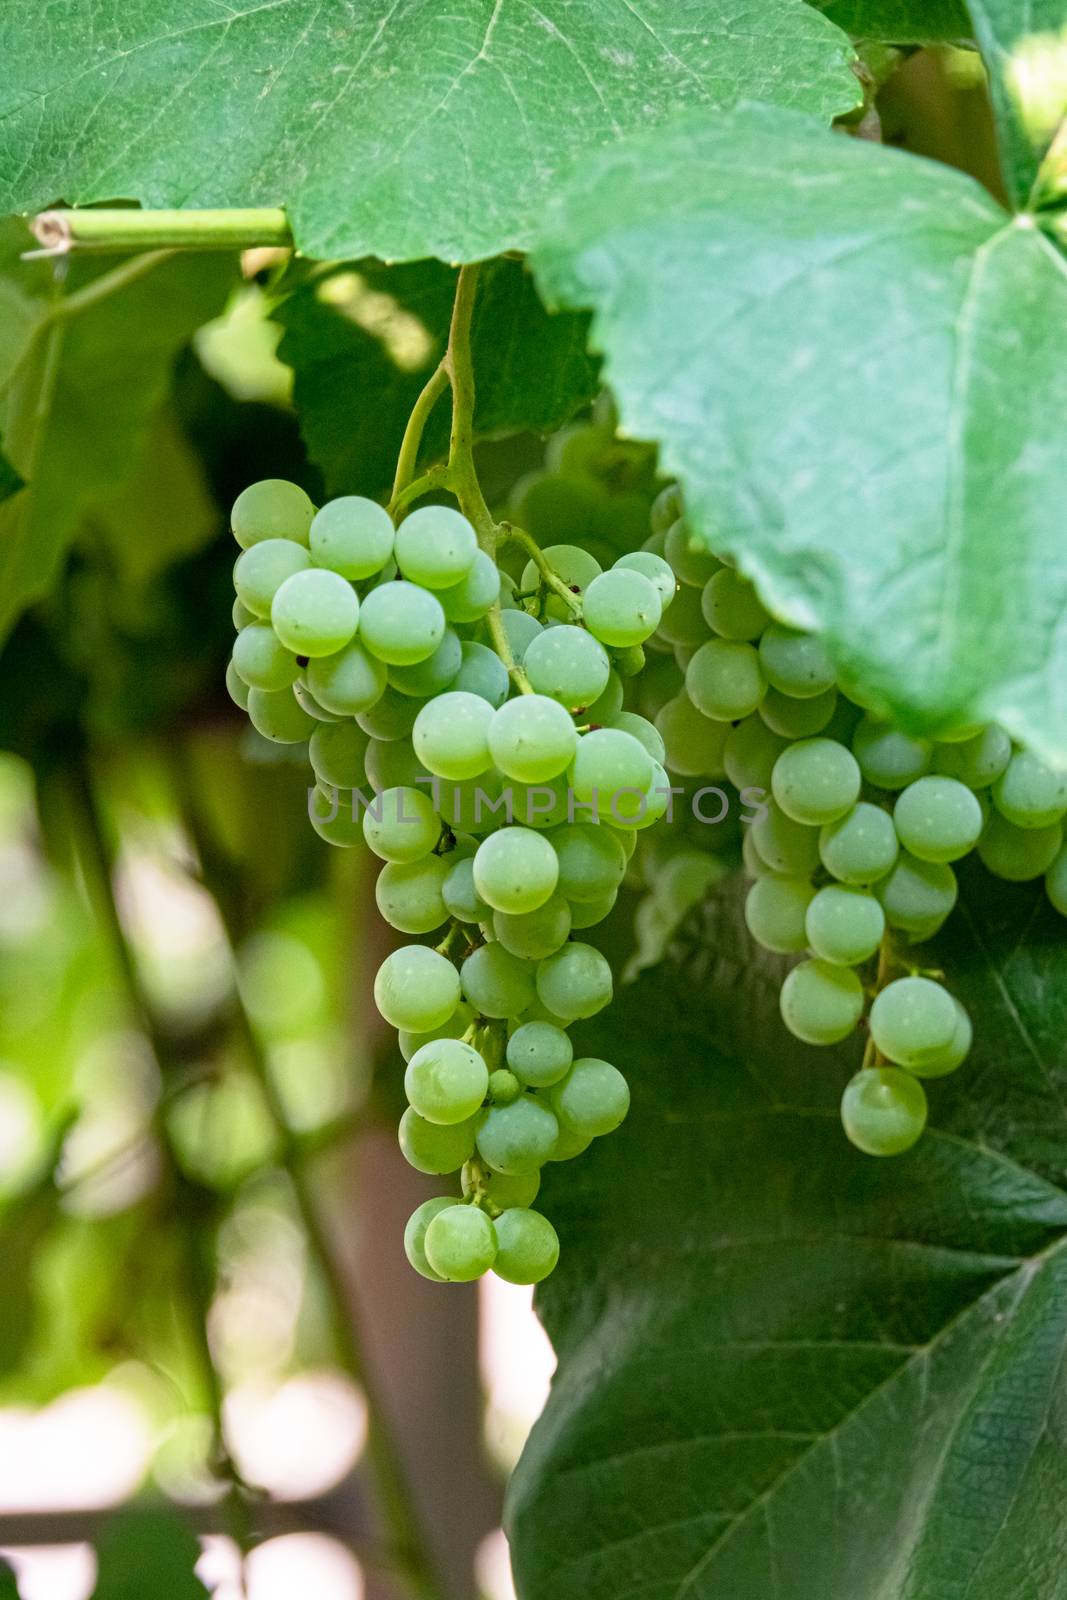 Fascicle green grape growing among the leaves. Vine branch with racemules of green grape